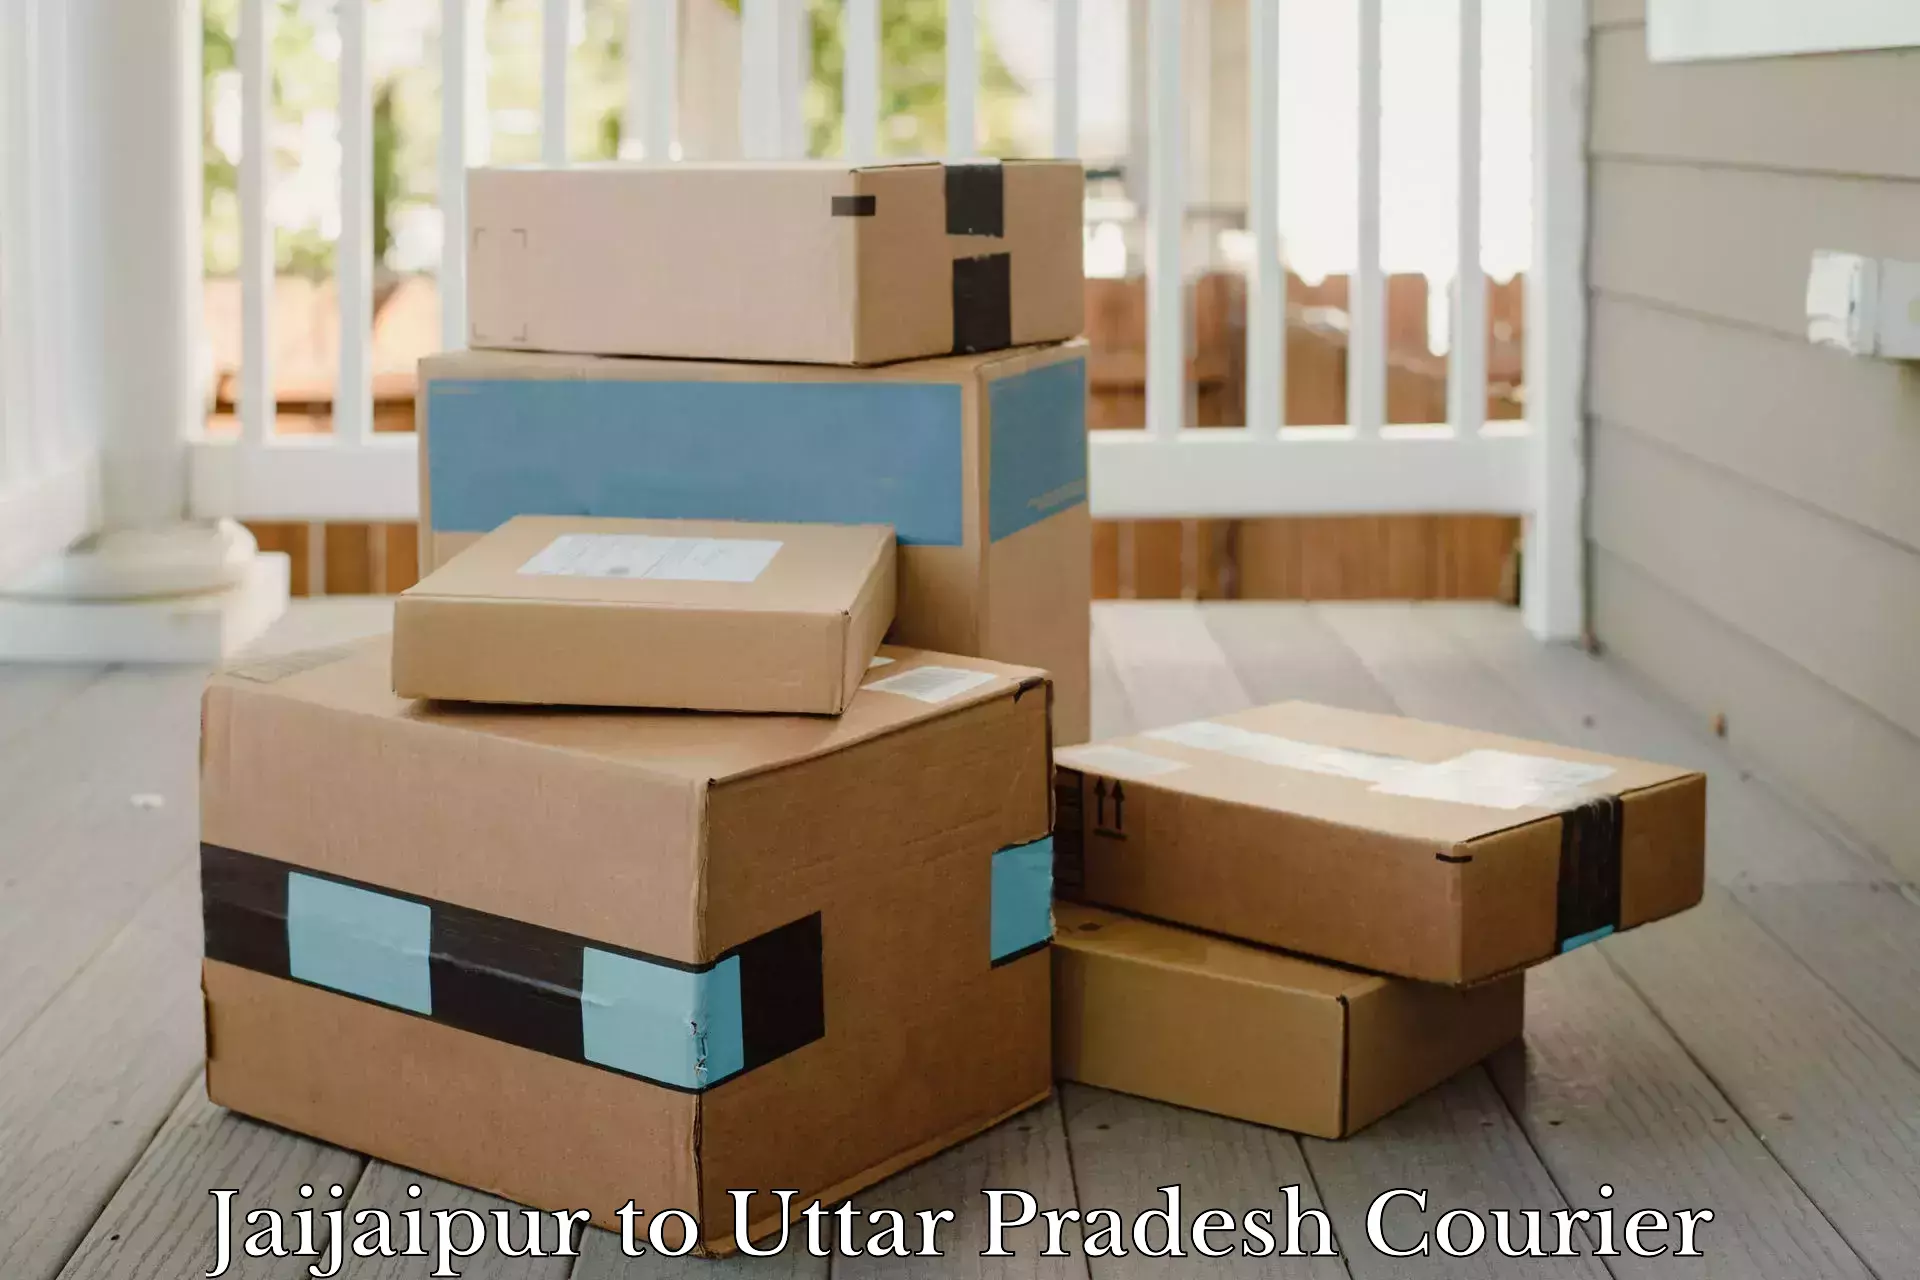 Round-the-clock parcel delivery Jaijaipur to Bahraich